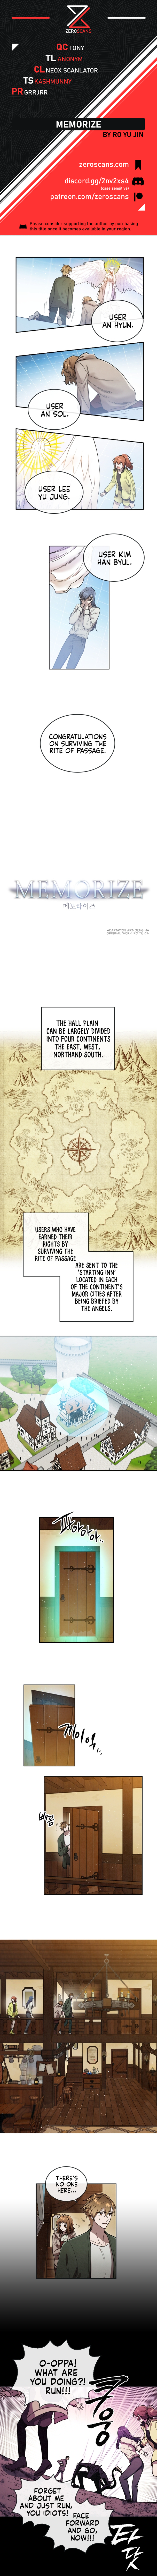 Memorize - Chapter 7012 - Image 1